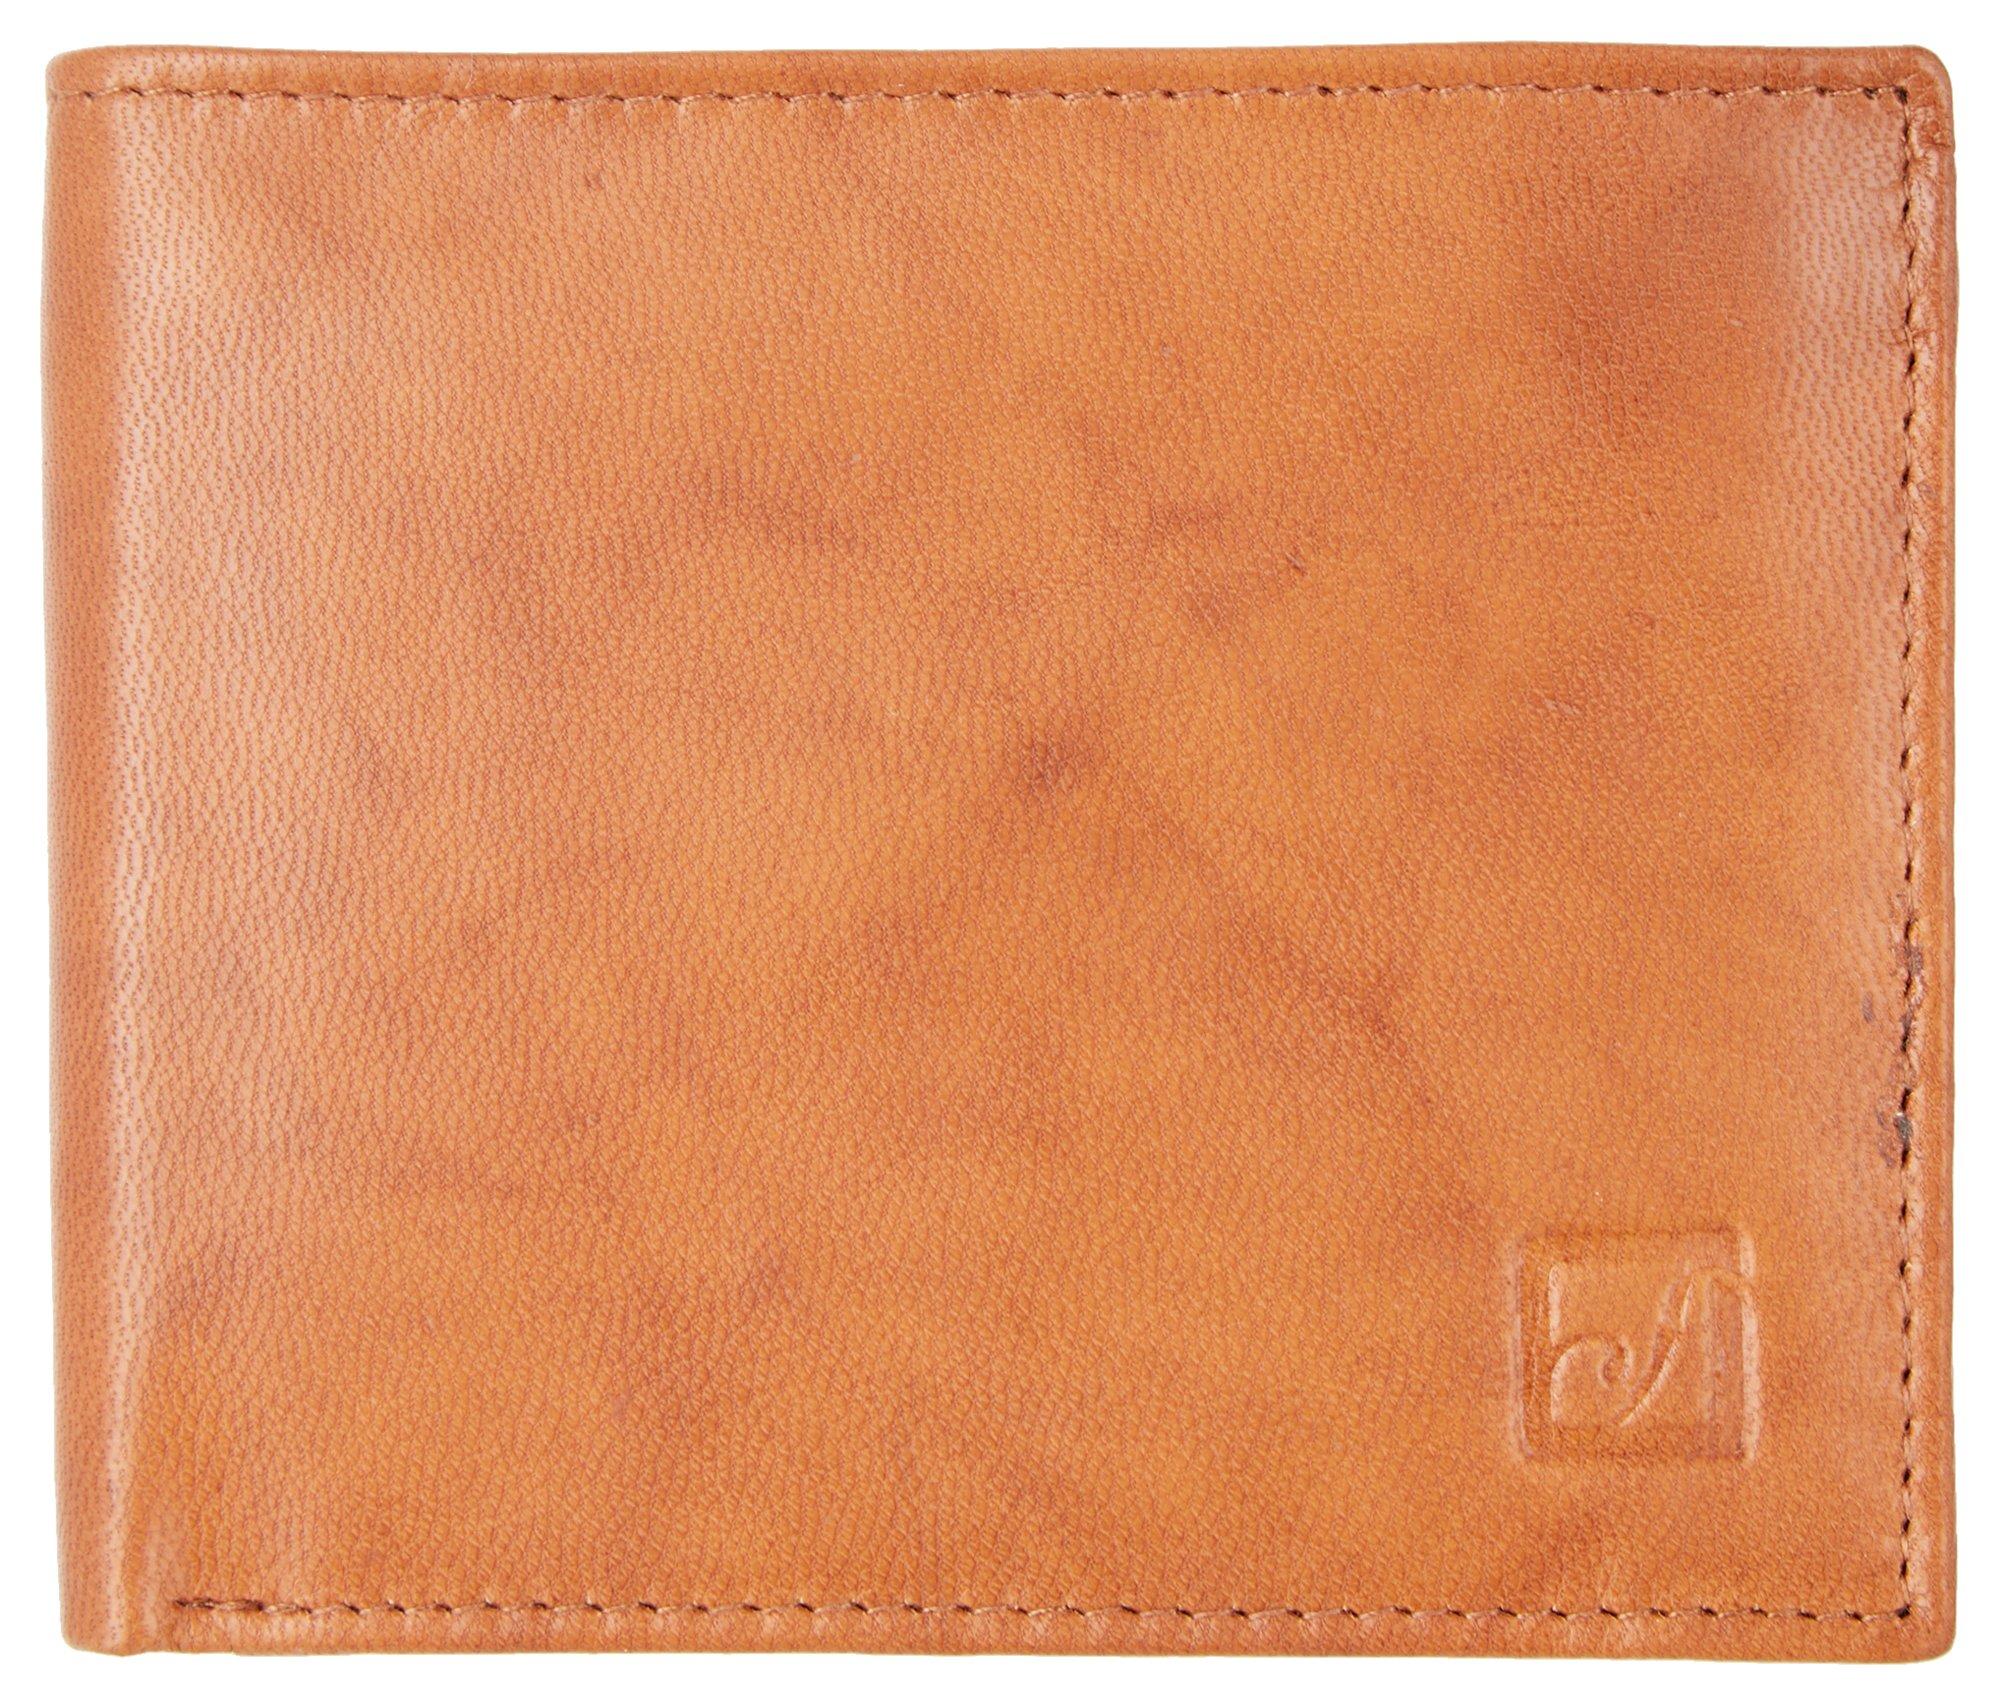 Stone Mountain Mens RFID Leather Zip Traveller Wallet